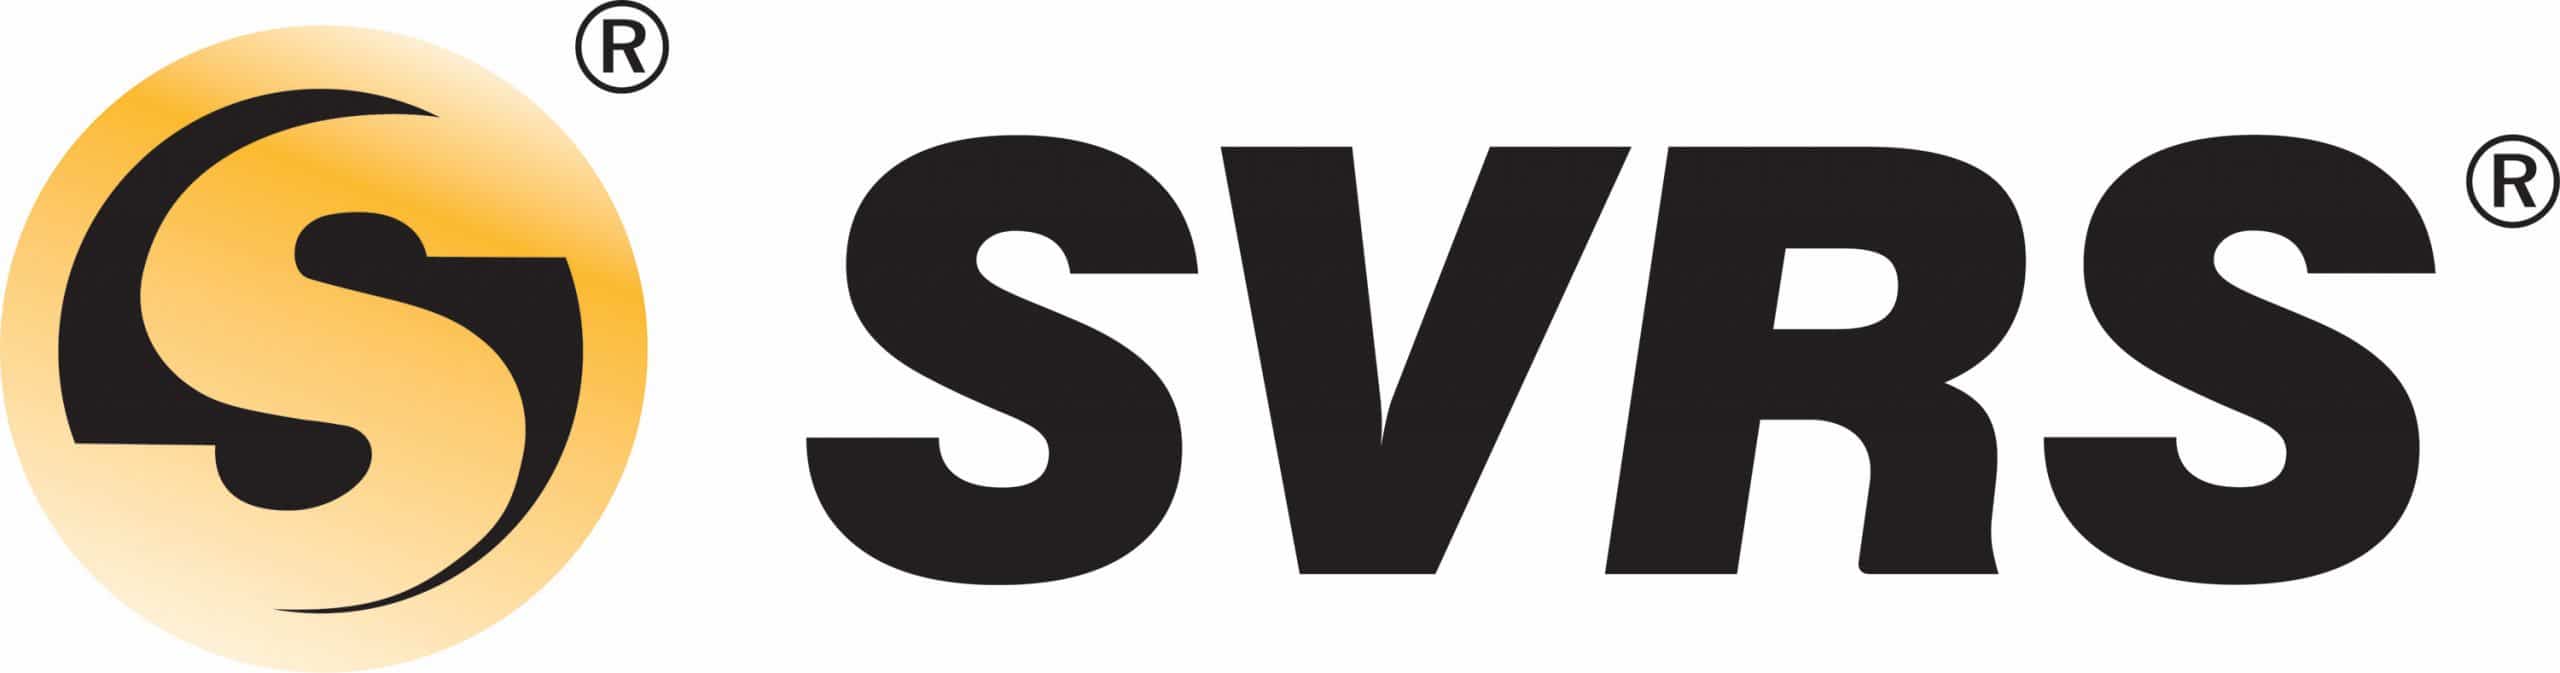 (Sorenson VRS logo) Design showing letter 'S' in yellow, with black background. Followed by company name in black: SVRS